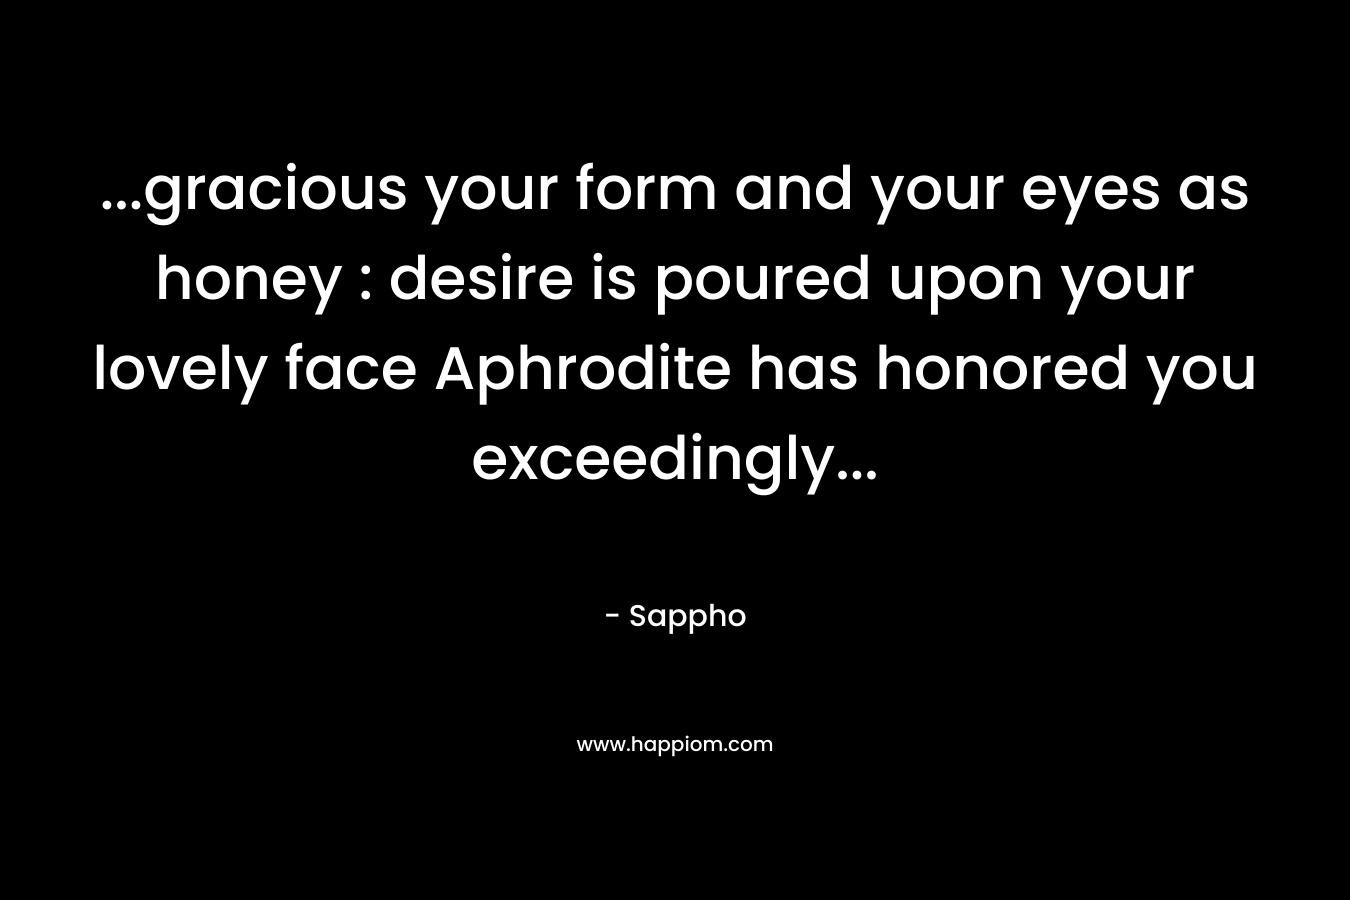 …gracious your form and your eyes as honey : desire is poured upon your lovely face Aphrodite has honored you exceedingly… – Sappho